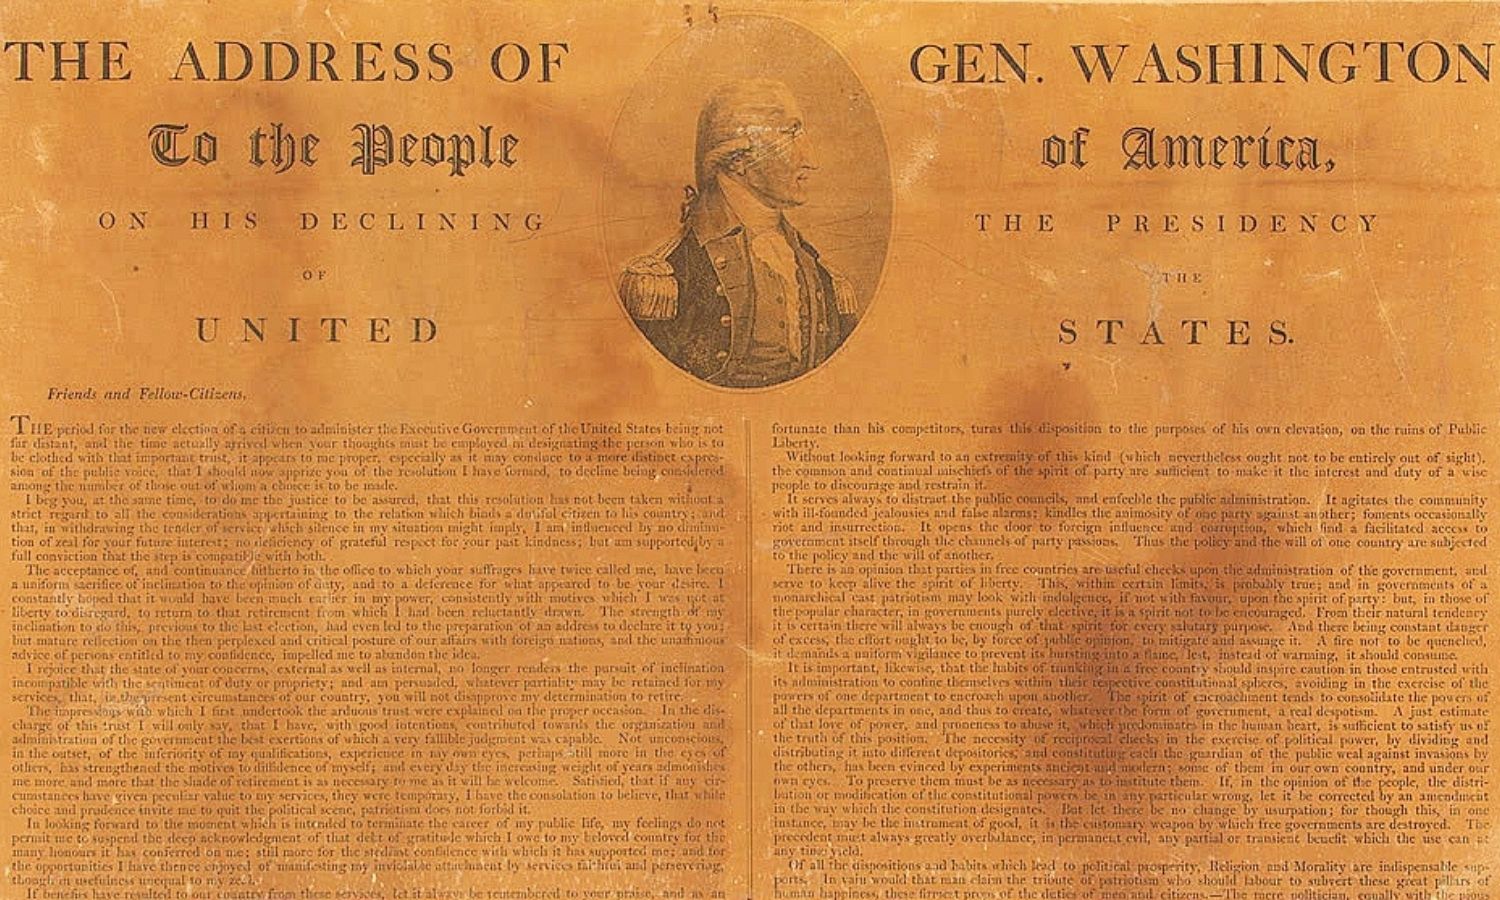 OTD in 1796: President George Washington provided a letter of address to say he would not run for president again after 20 years of service.